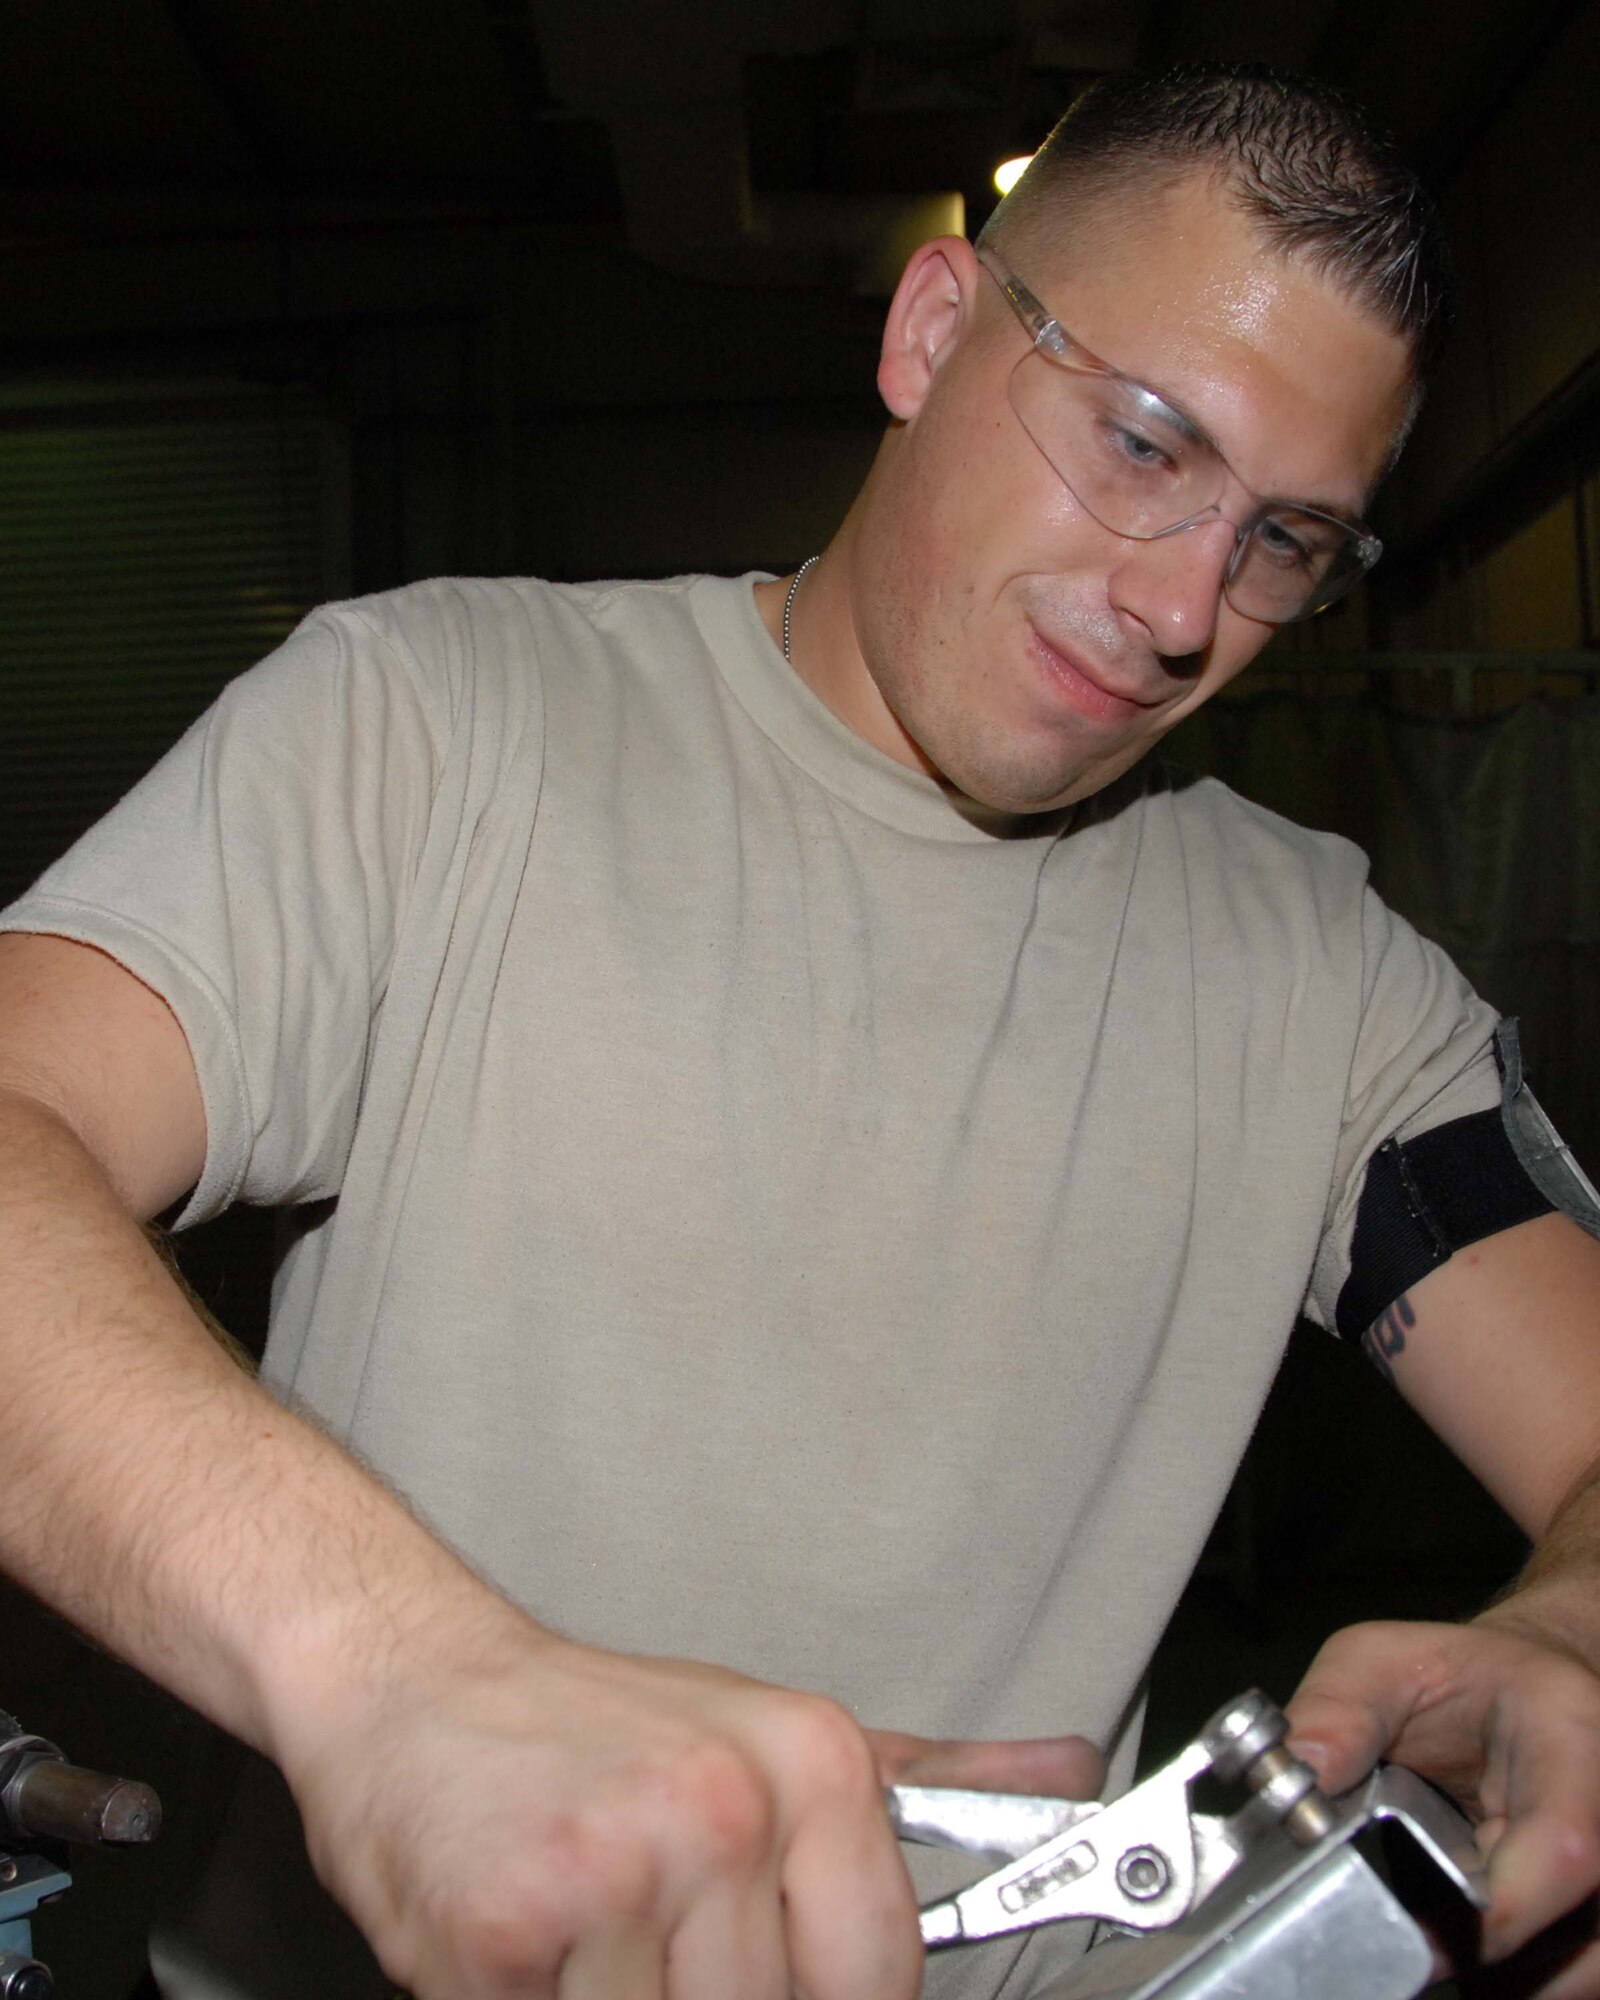 SOUTHWEST ASIA -- Senior Airman Jesse Spears attaches a rivet for shelving in the fabrication shop here Oct. 7. Rivets are attached with a rivet a gun and are used as a secure fastener to hold two pieces of metal together. Airman Spears is an aircraft structural maintenance journeyman with the 380th Expeditionary Aircraft Maintenance Squadron. Airman Spears is deployed from Tinker Air Force Base, Okla. and calls Mascoutah, Ill., home. (U.S. Air Force photo by Tech. Sgt. Denise Johnson) (released)